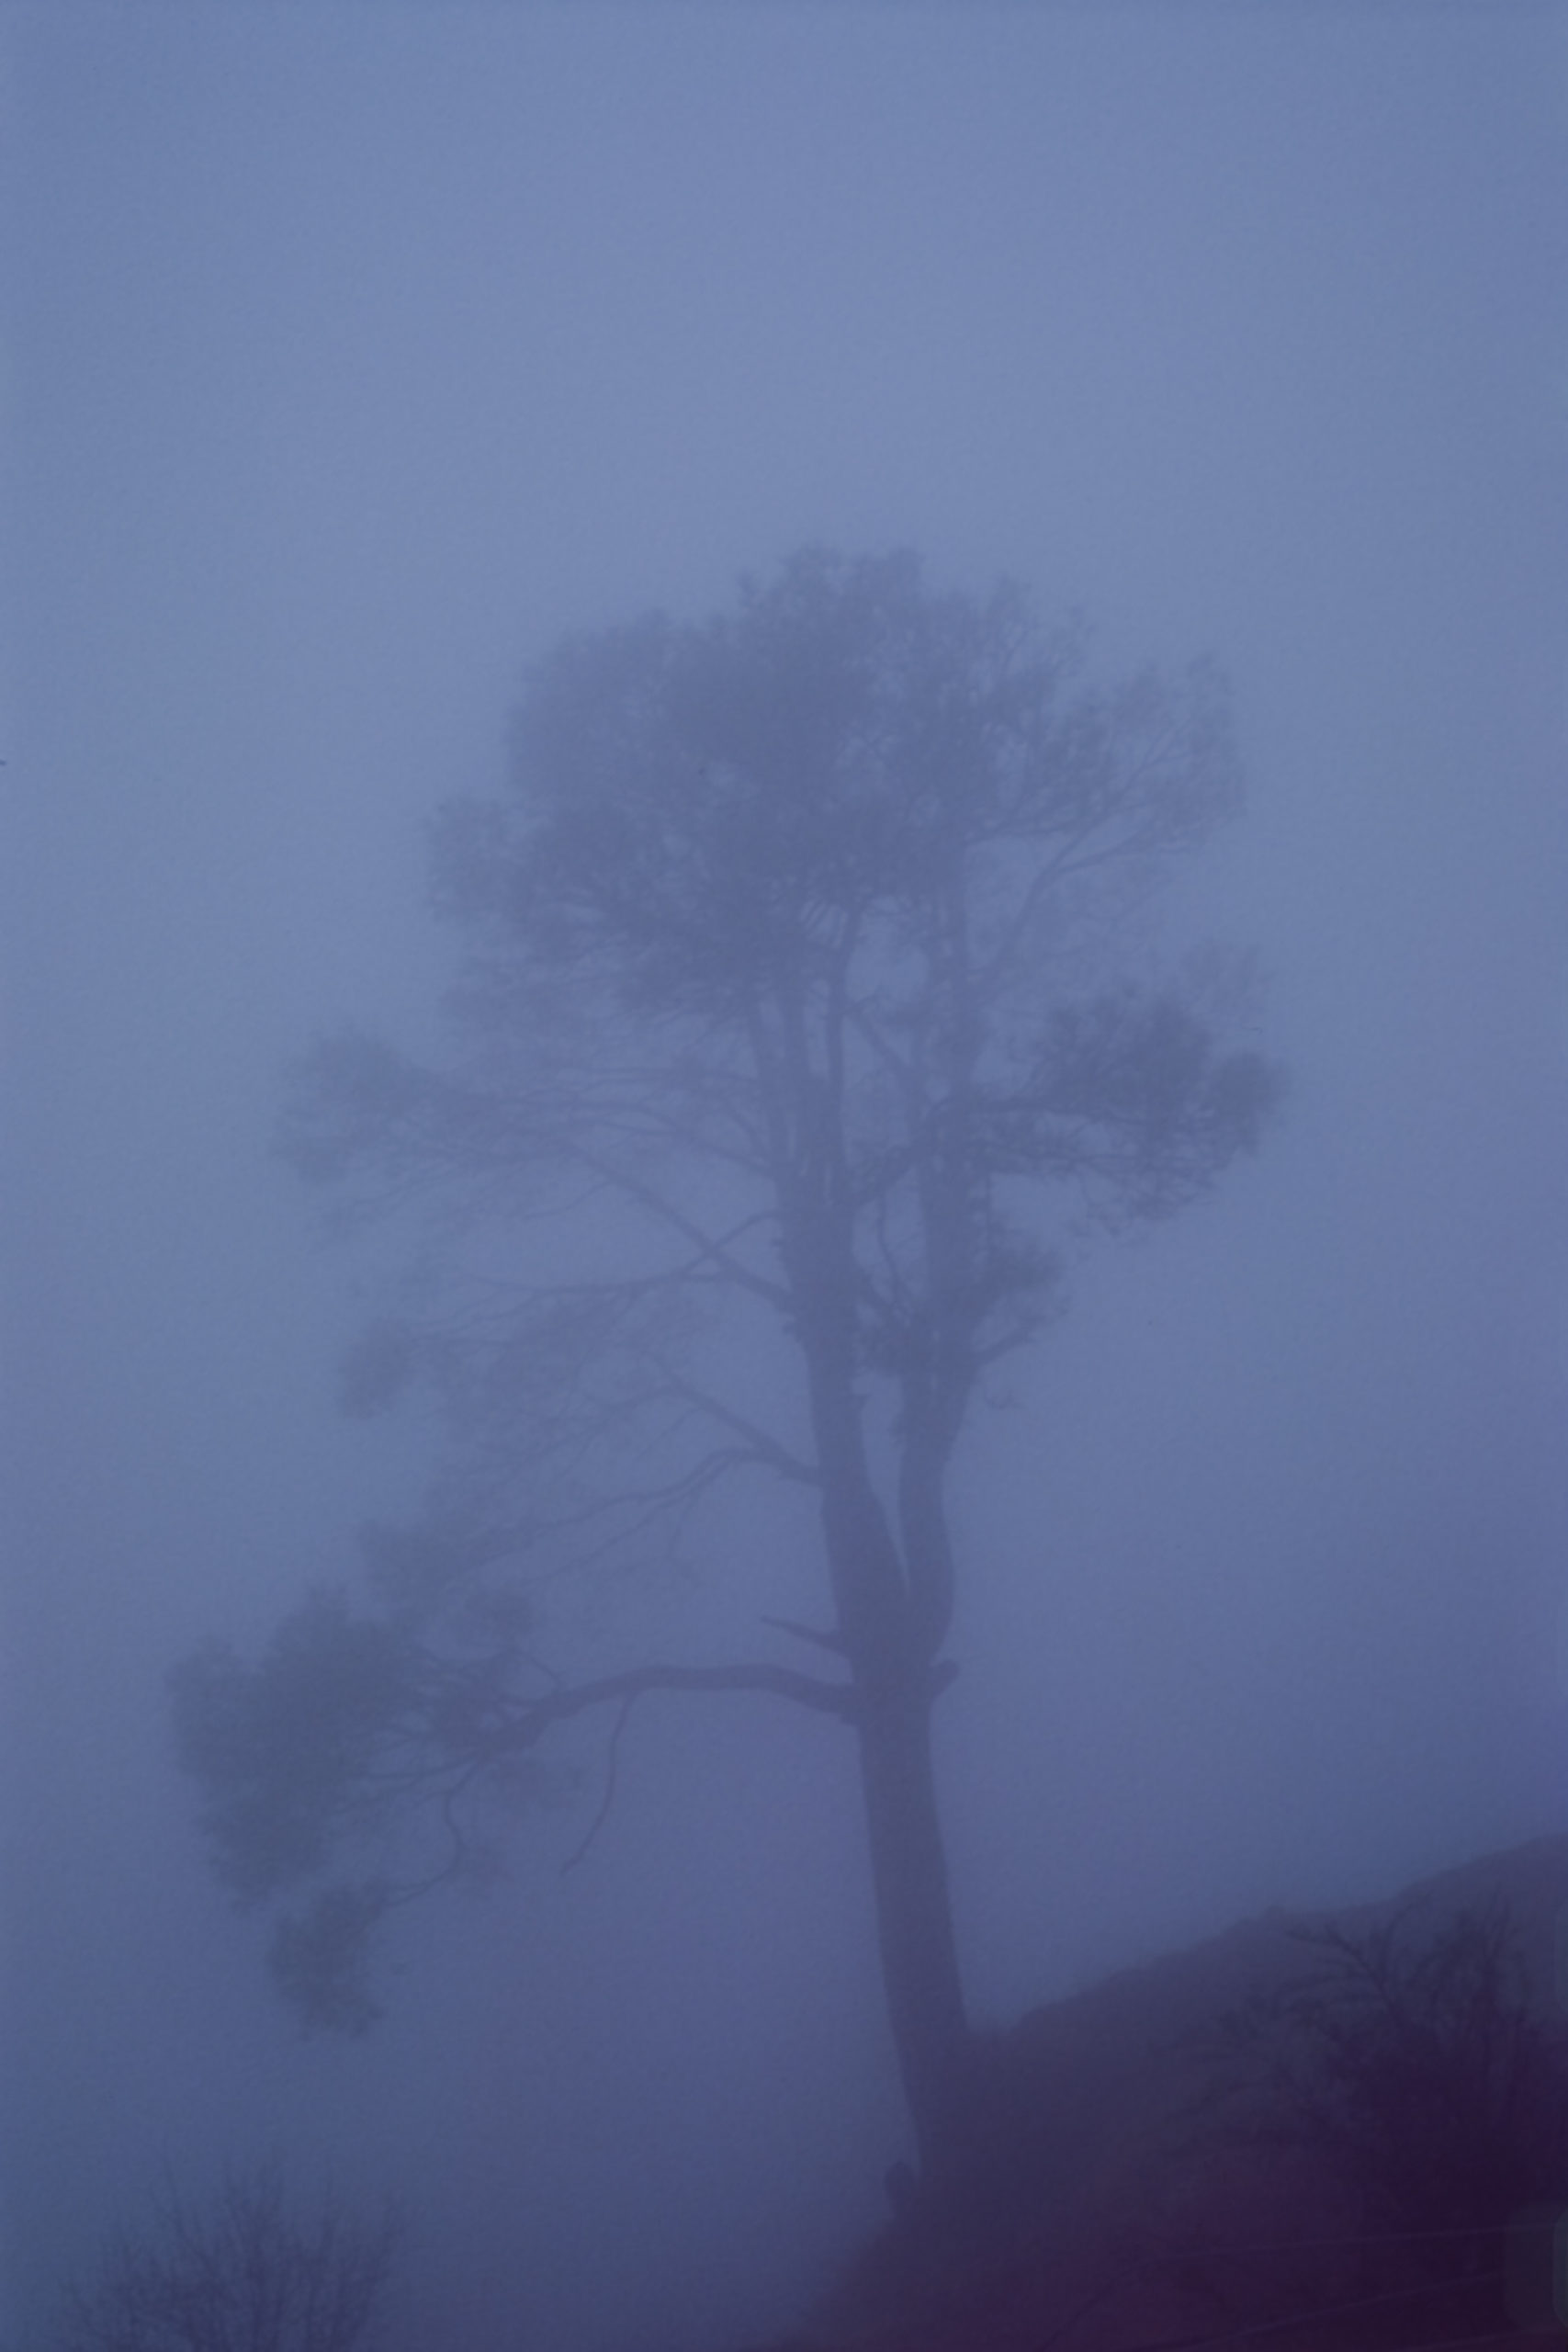 A deodar tree enveloped in a thick fog